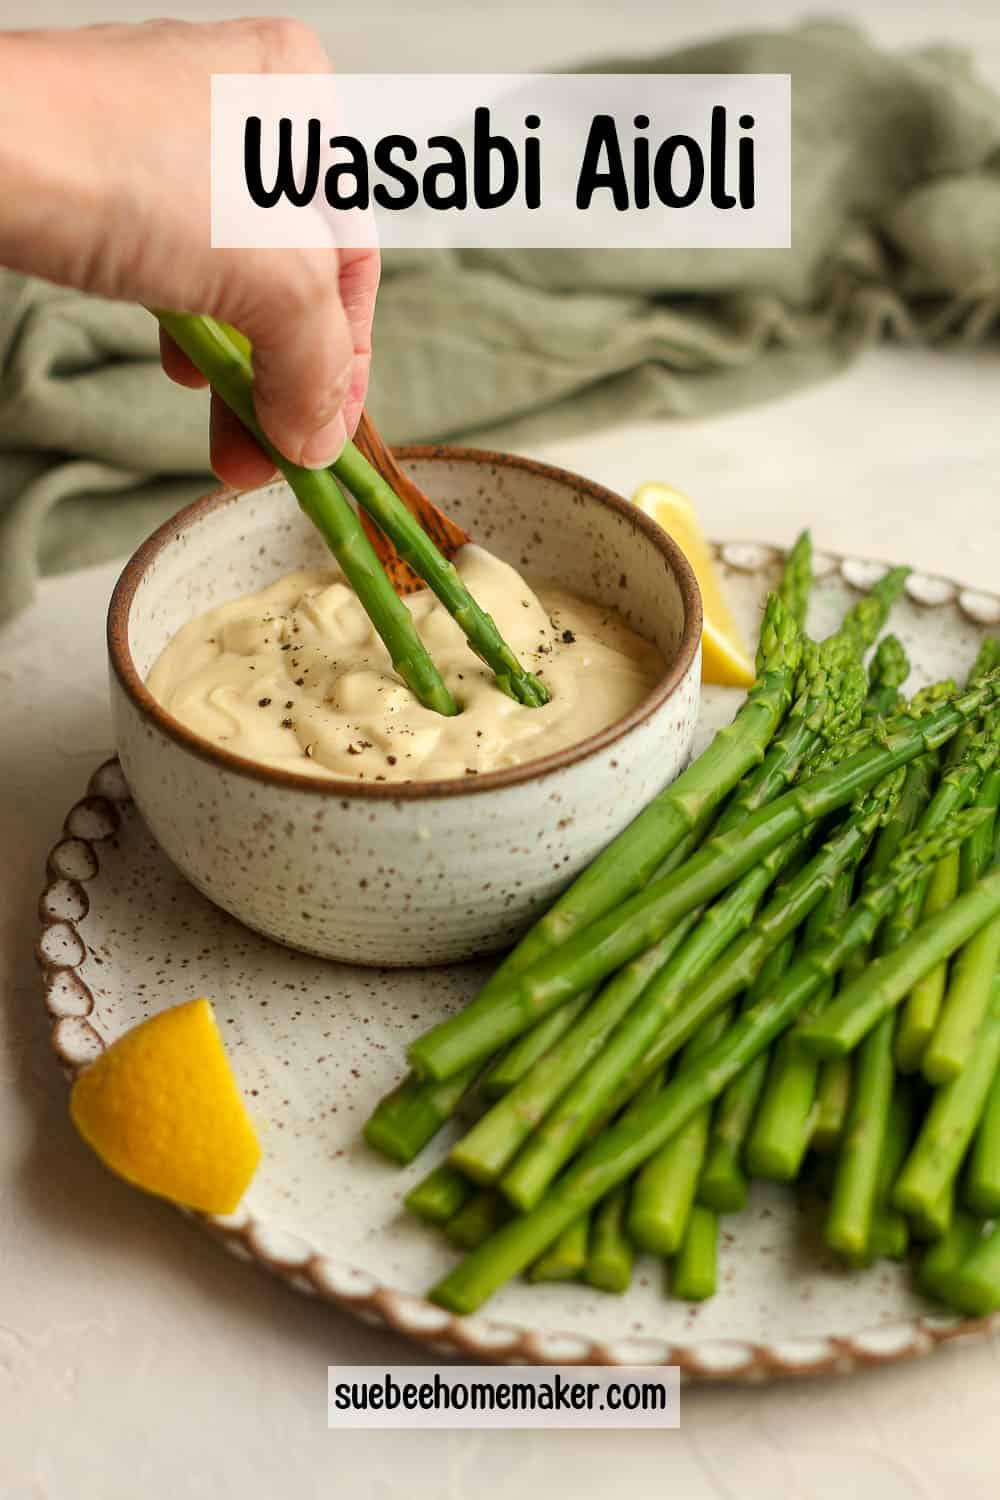 A hand dipping the blanched asparagus in the wasabi dip.